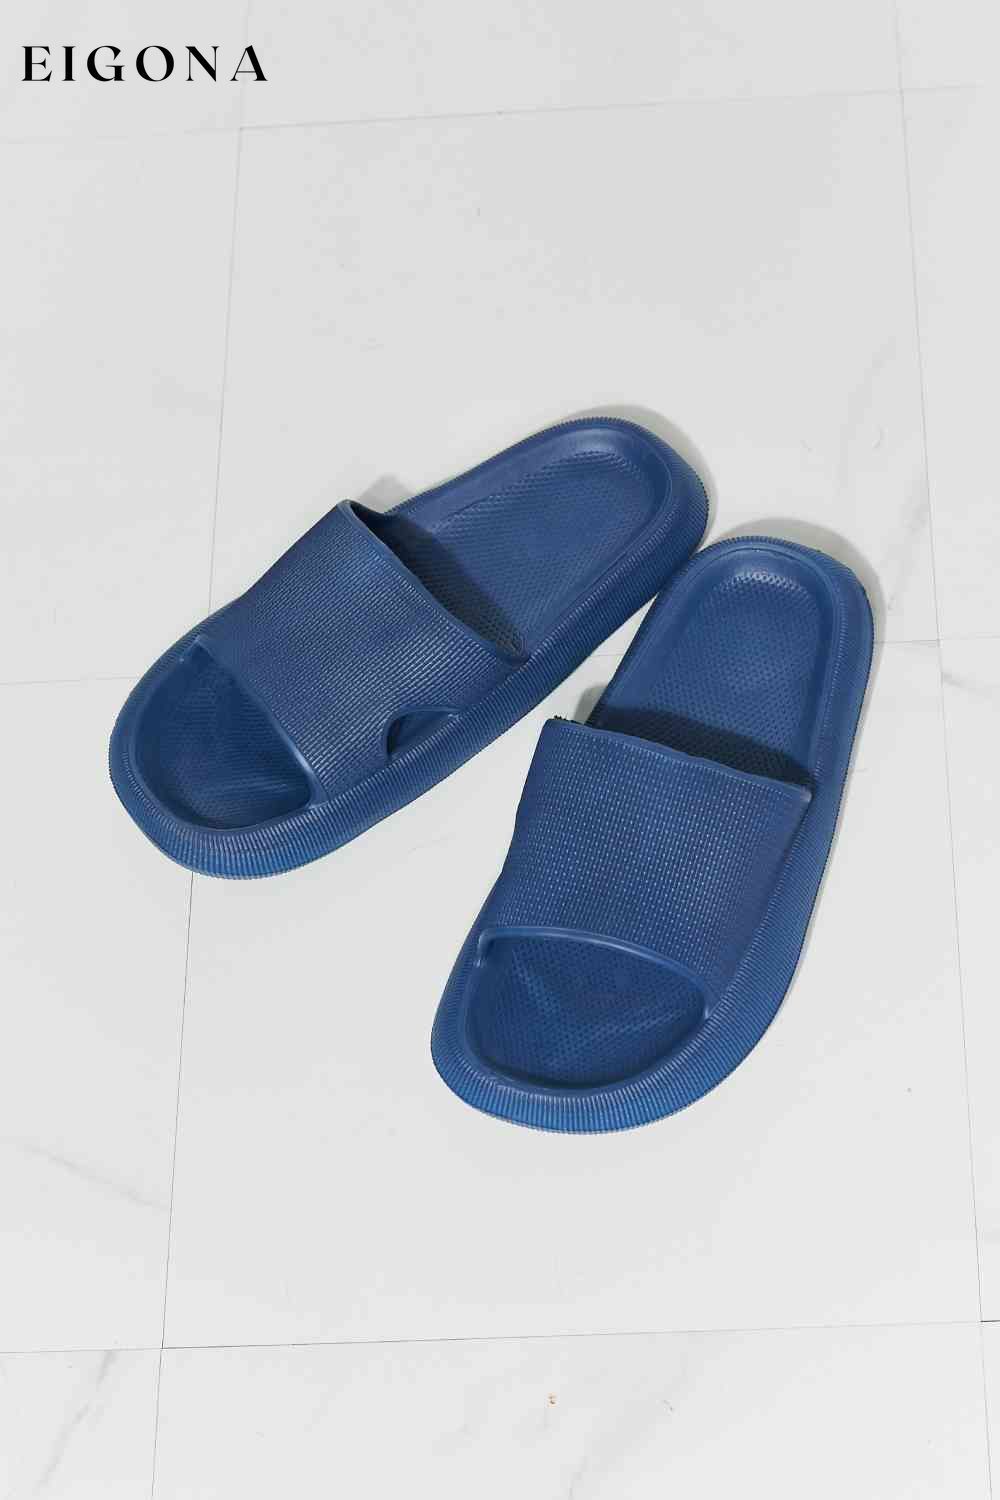 Arms Around Me Open Toe Slide in Navy Melody Ship from USA shoes womens shoes